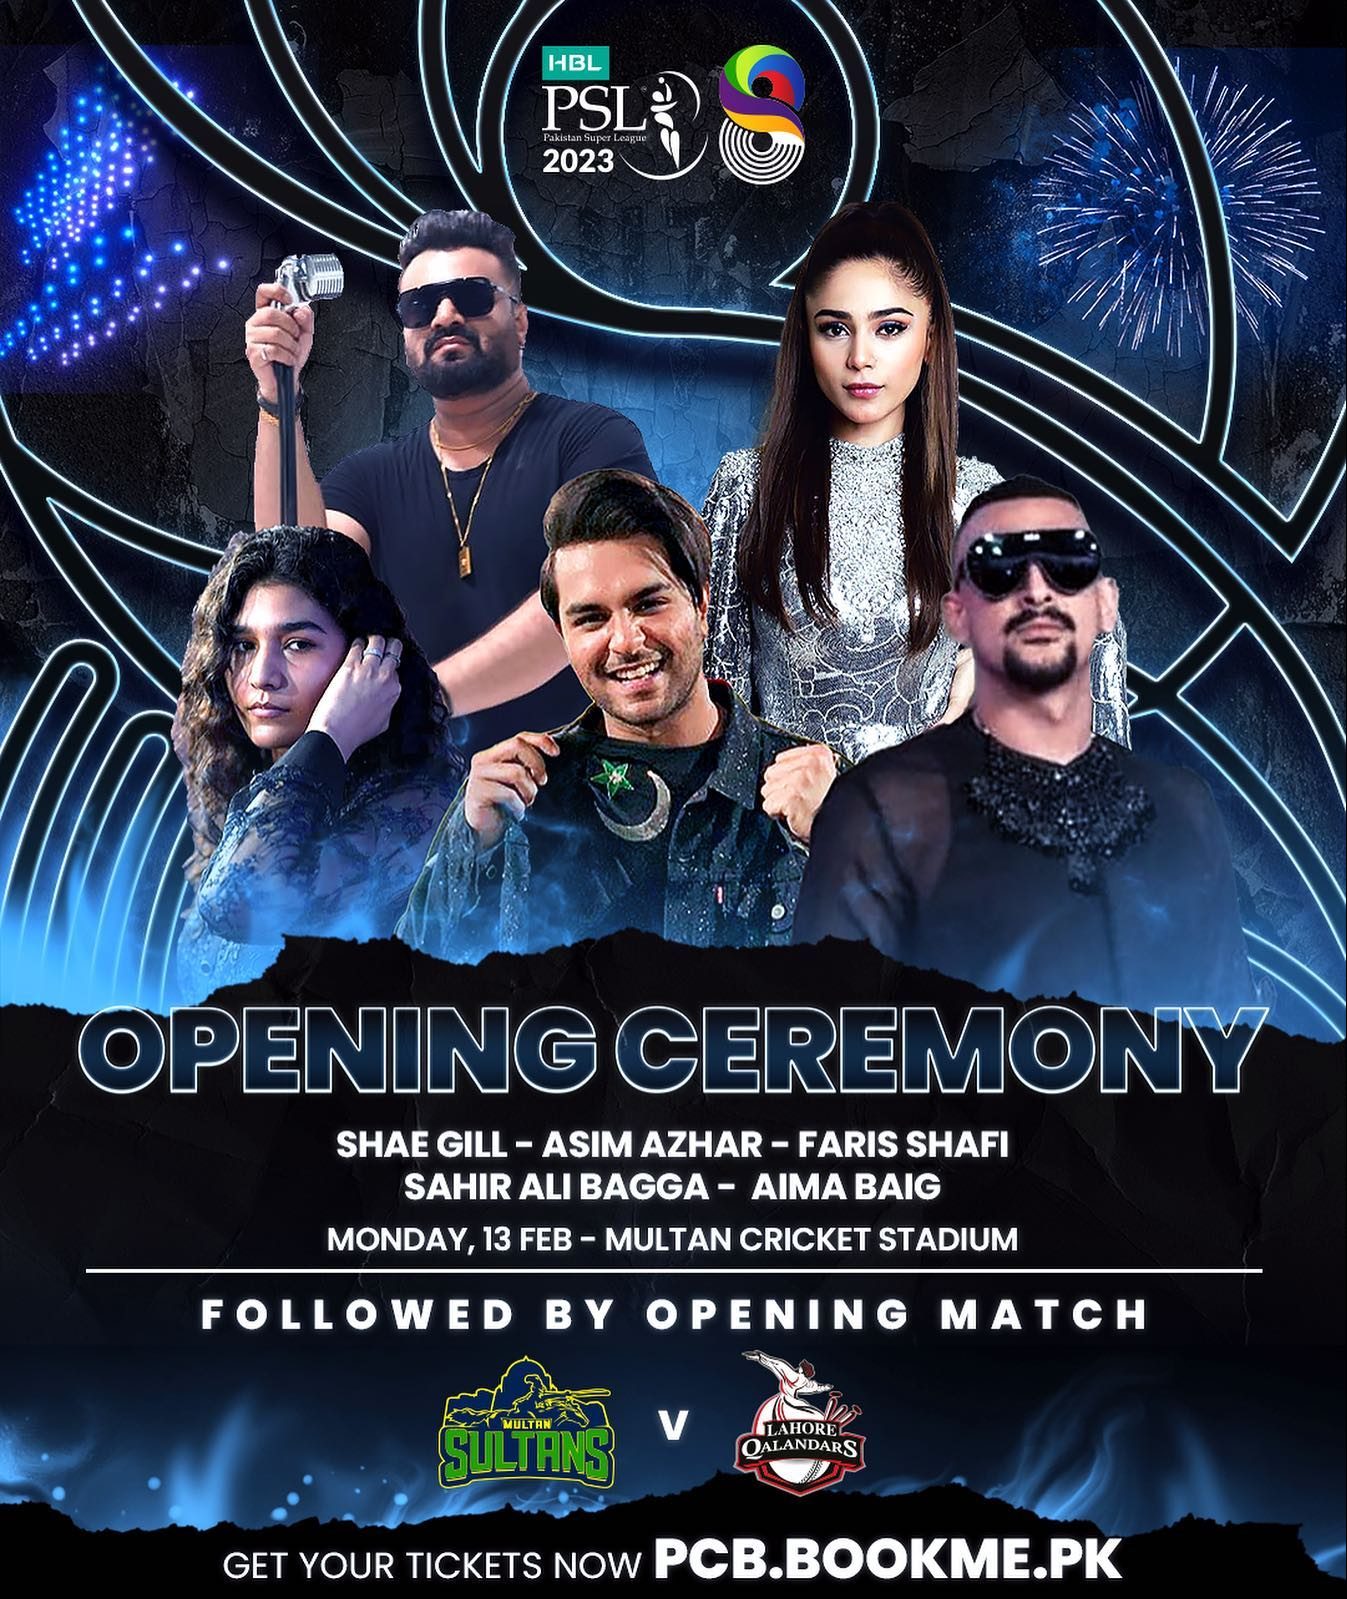 PSL 8 Grand Opening Ceremony 2023